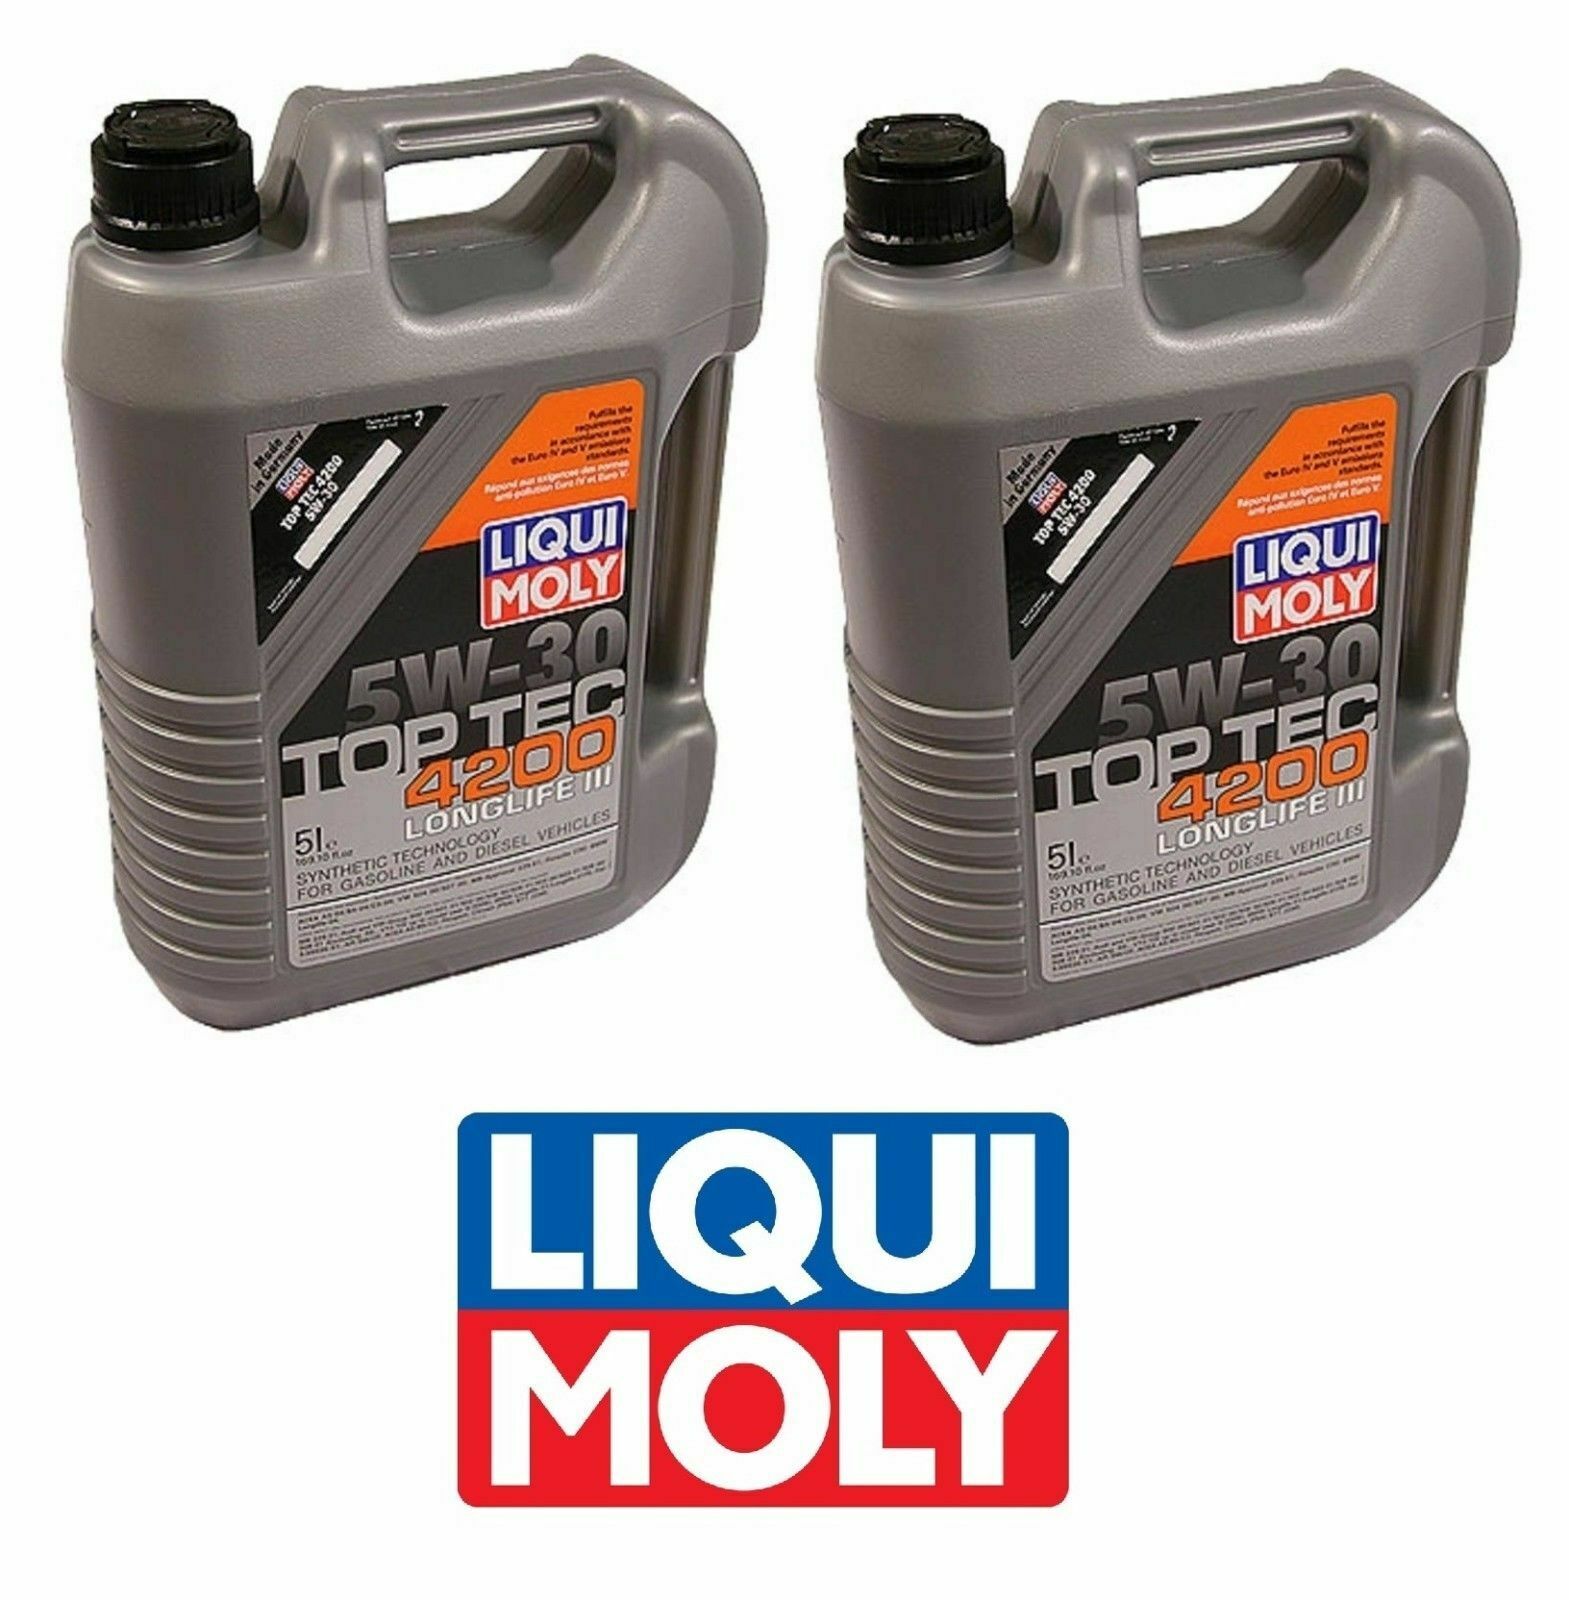 10 Liters Liqui Moly TOP TEC 4200 5w30 Synthetic Engine Oil for